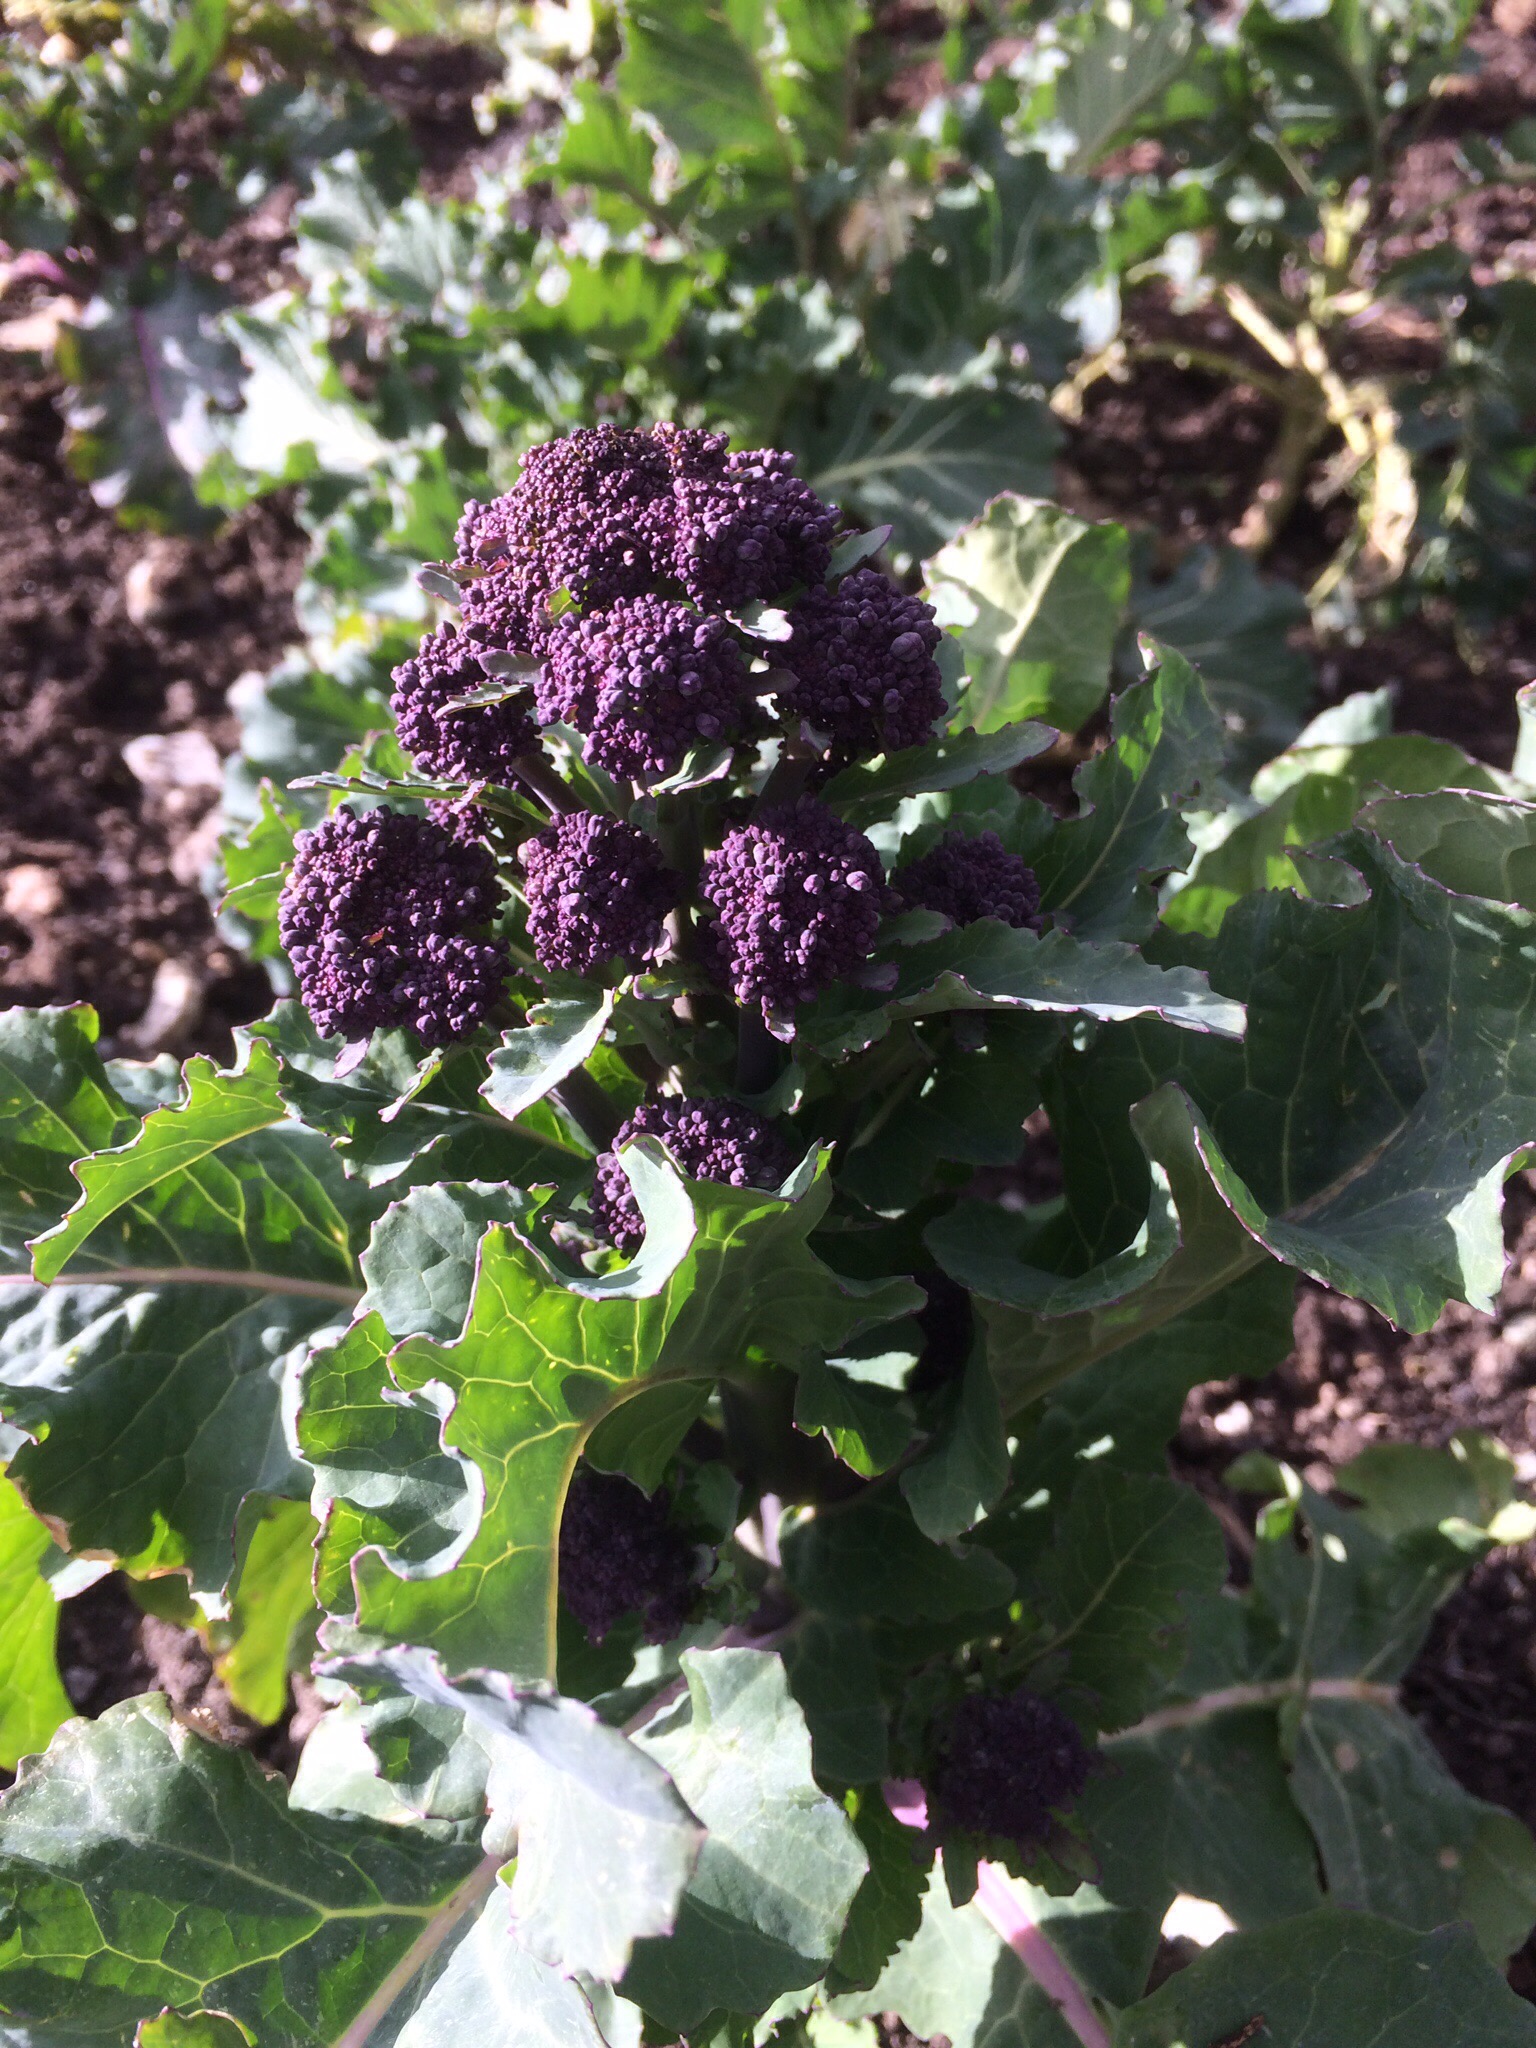 March 2016 trip to the allotment